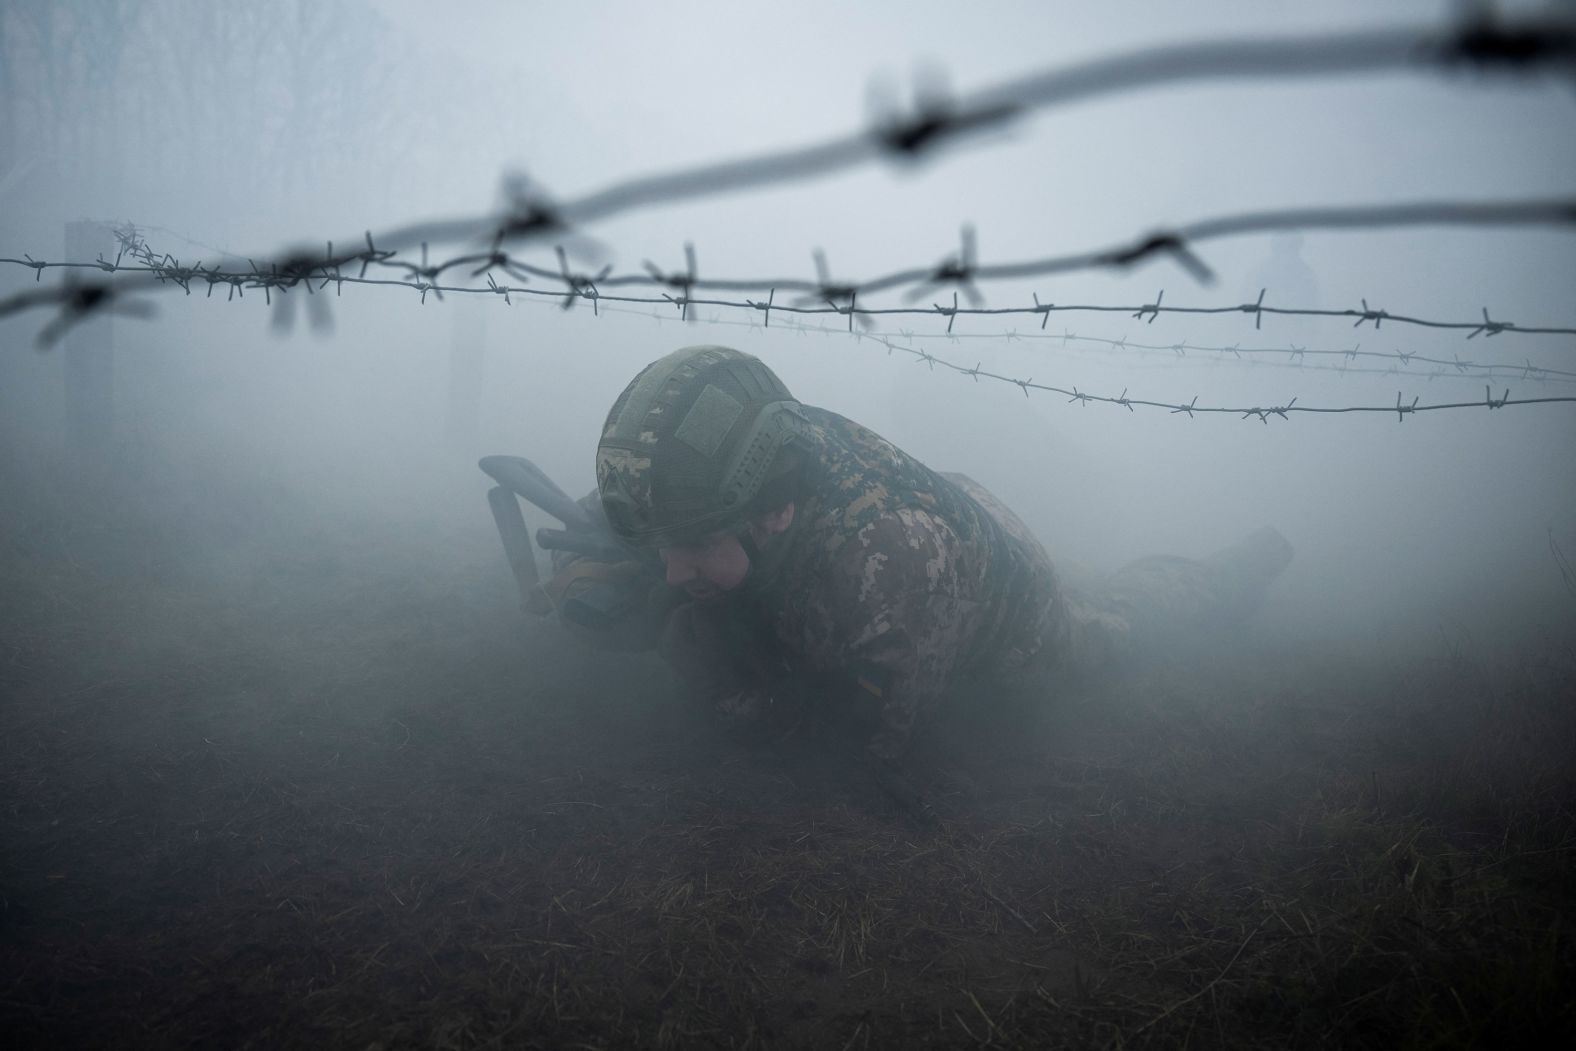 A new Ukrainian recruit takes part in a military exercise in central Ukraine on Tuesday, March 12.